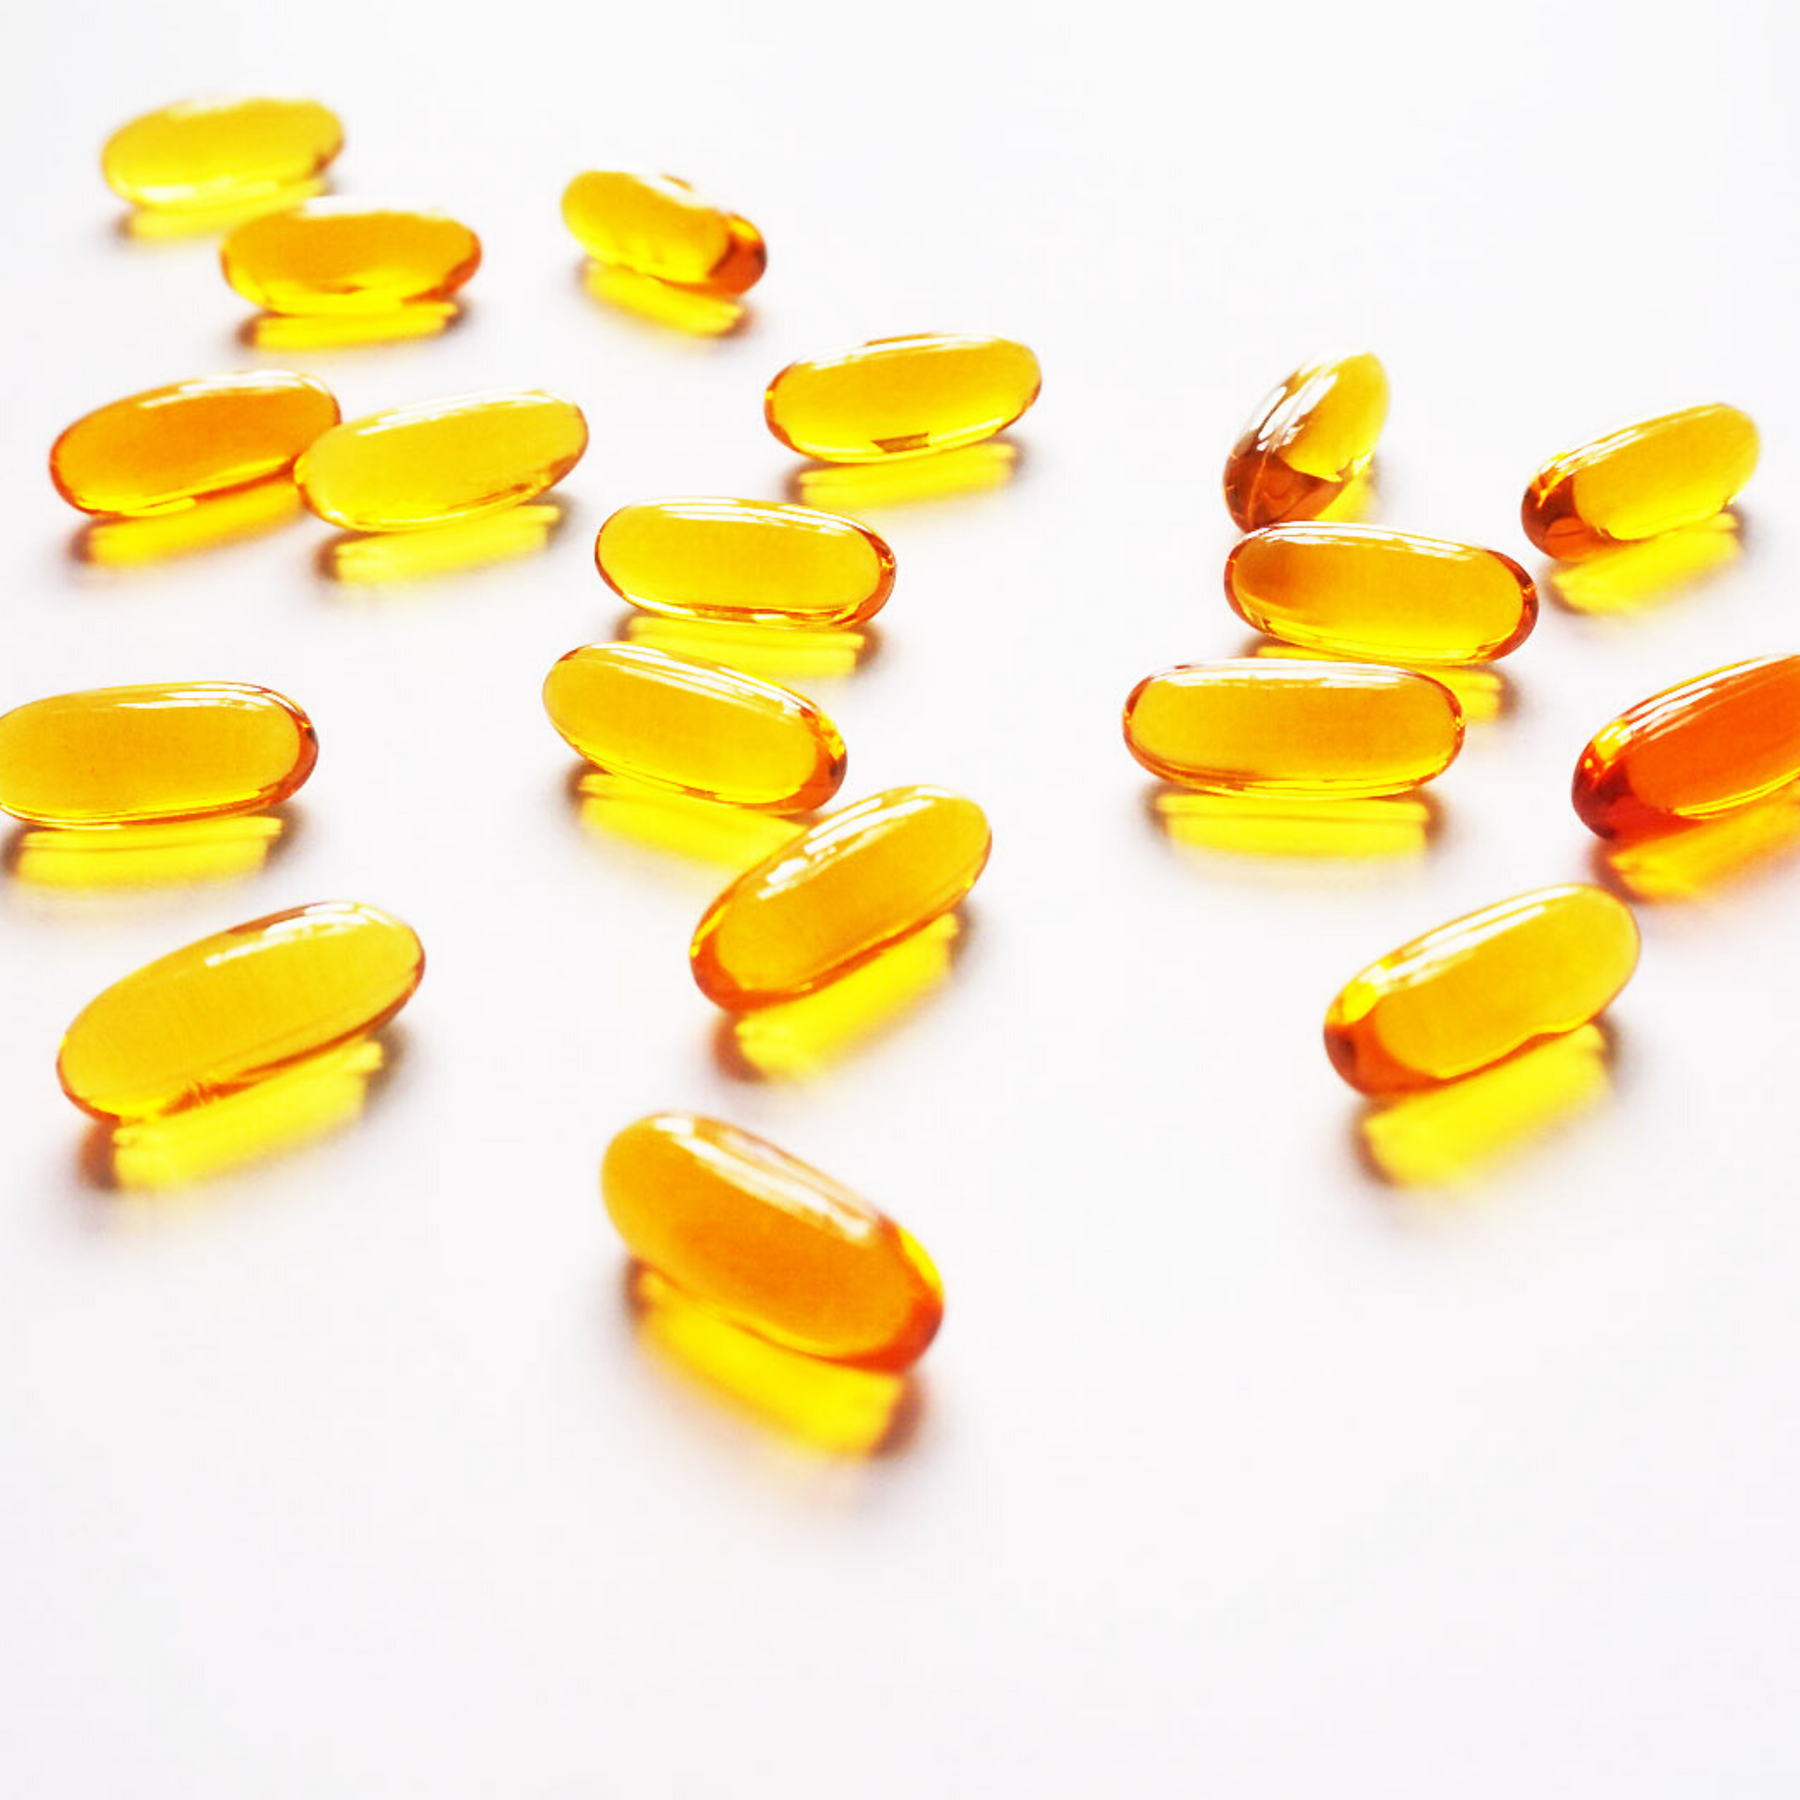 Krill Oil: The Most Powerful Omega-3